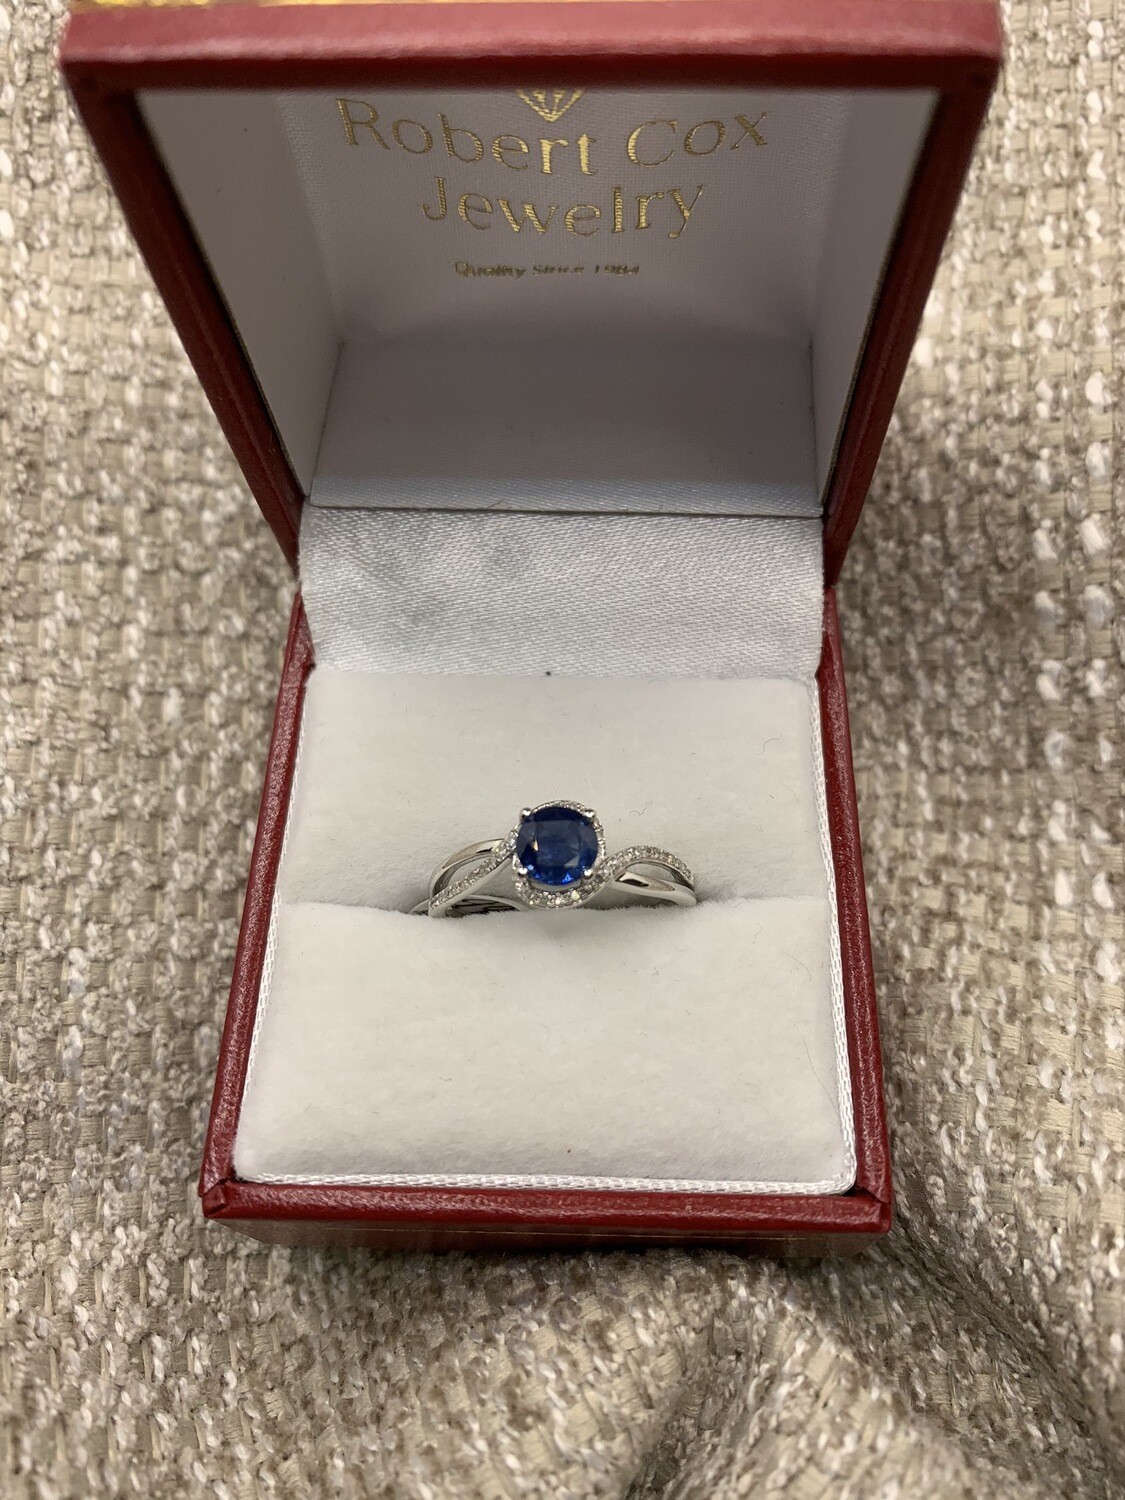 Sapphire Ring ( Genuine Brilliant Cut Sapphire ) With Diamond Accents set in 14K White Gold